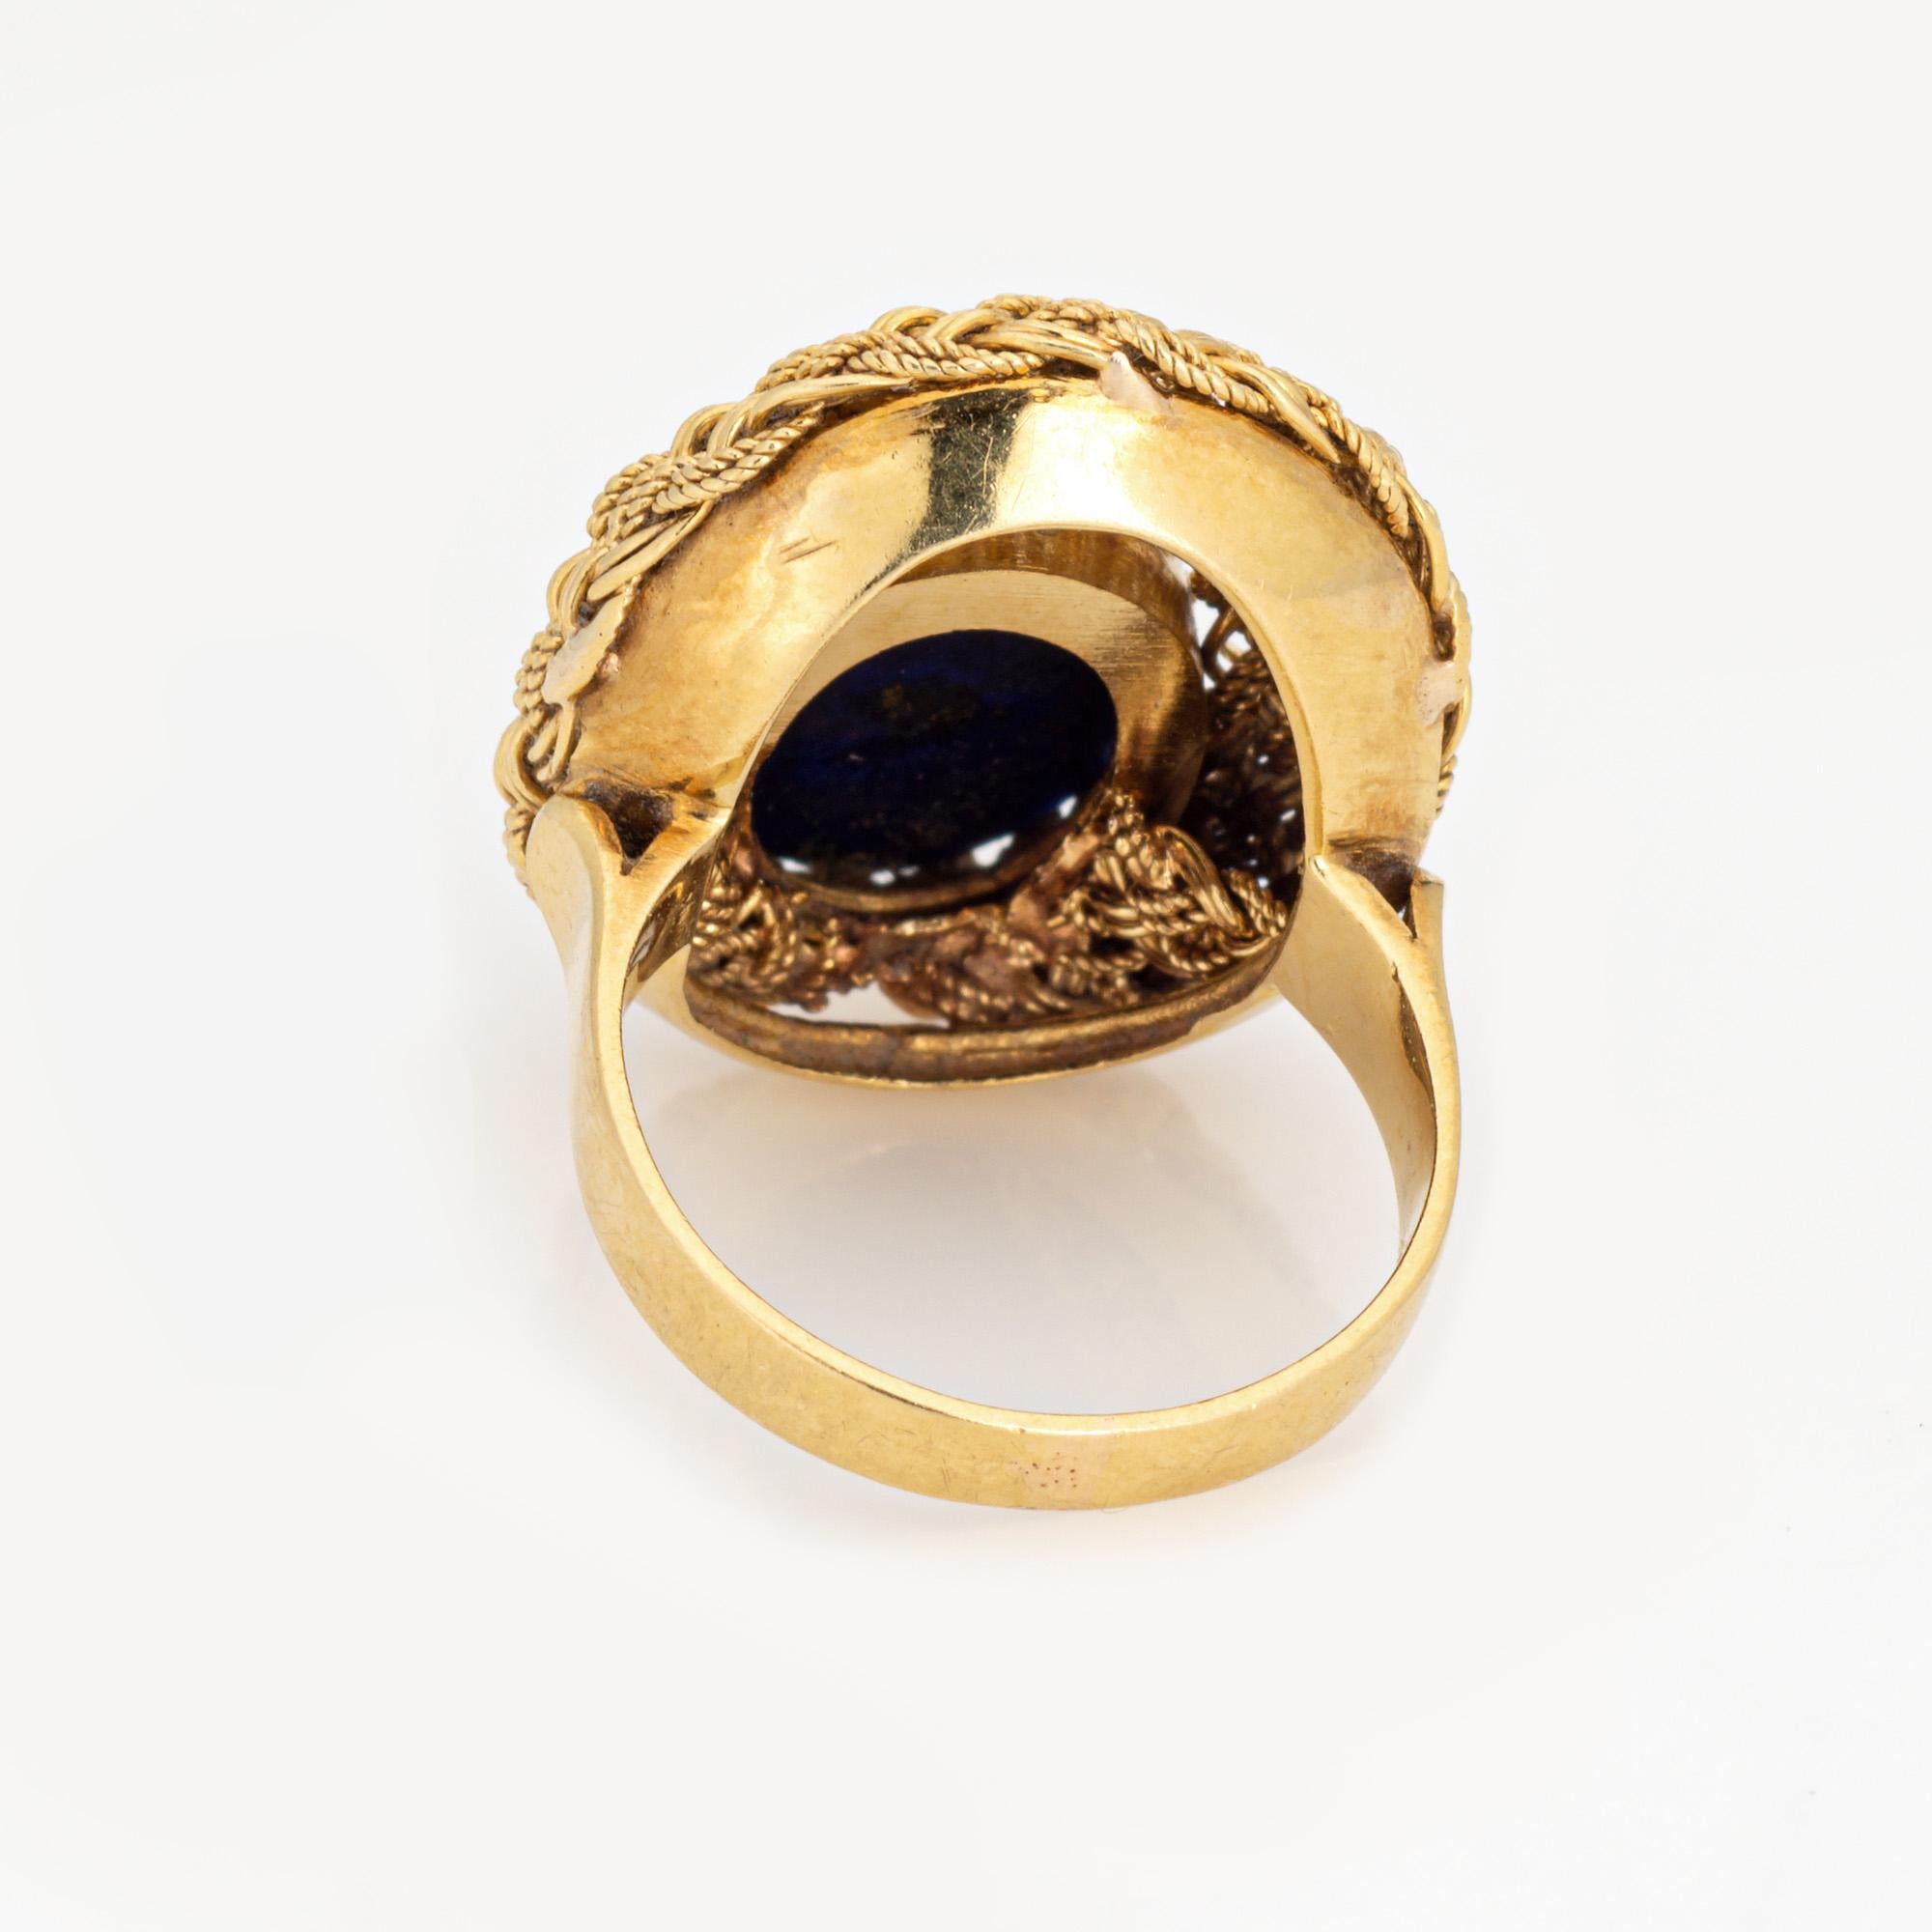 Vintage Lapis Lazuli Ring 18k Yellow Gold Sz 5.75 Cocktail Fine Estate Jewelry  In Good Condition For Sale In Torrance, CA